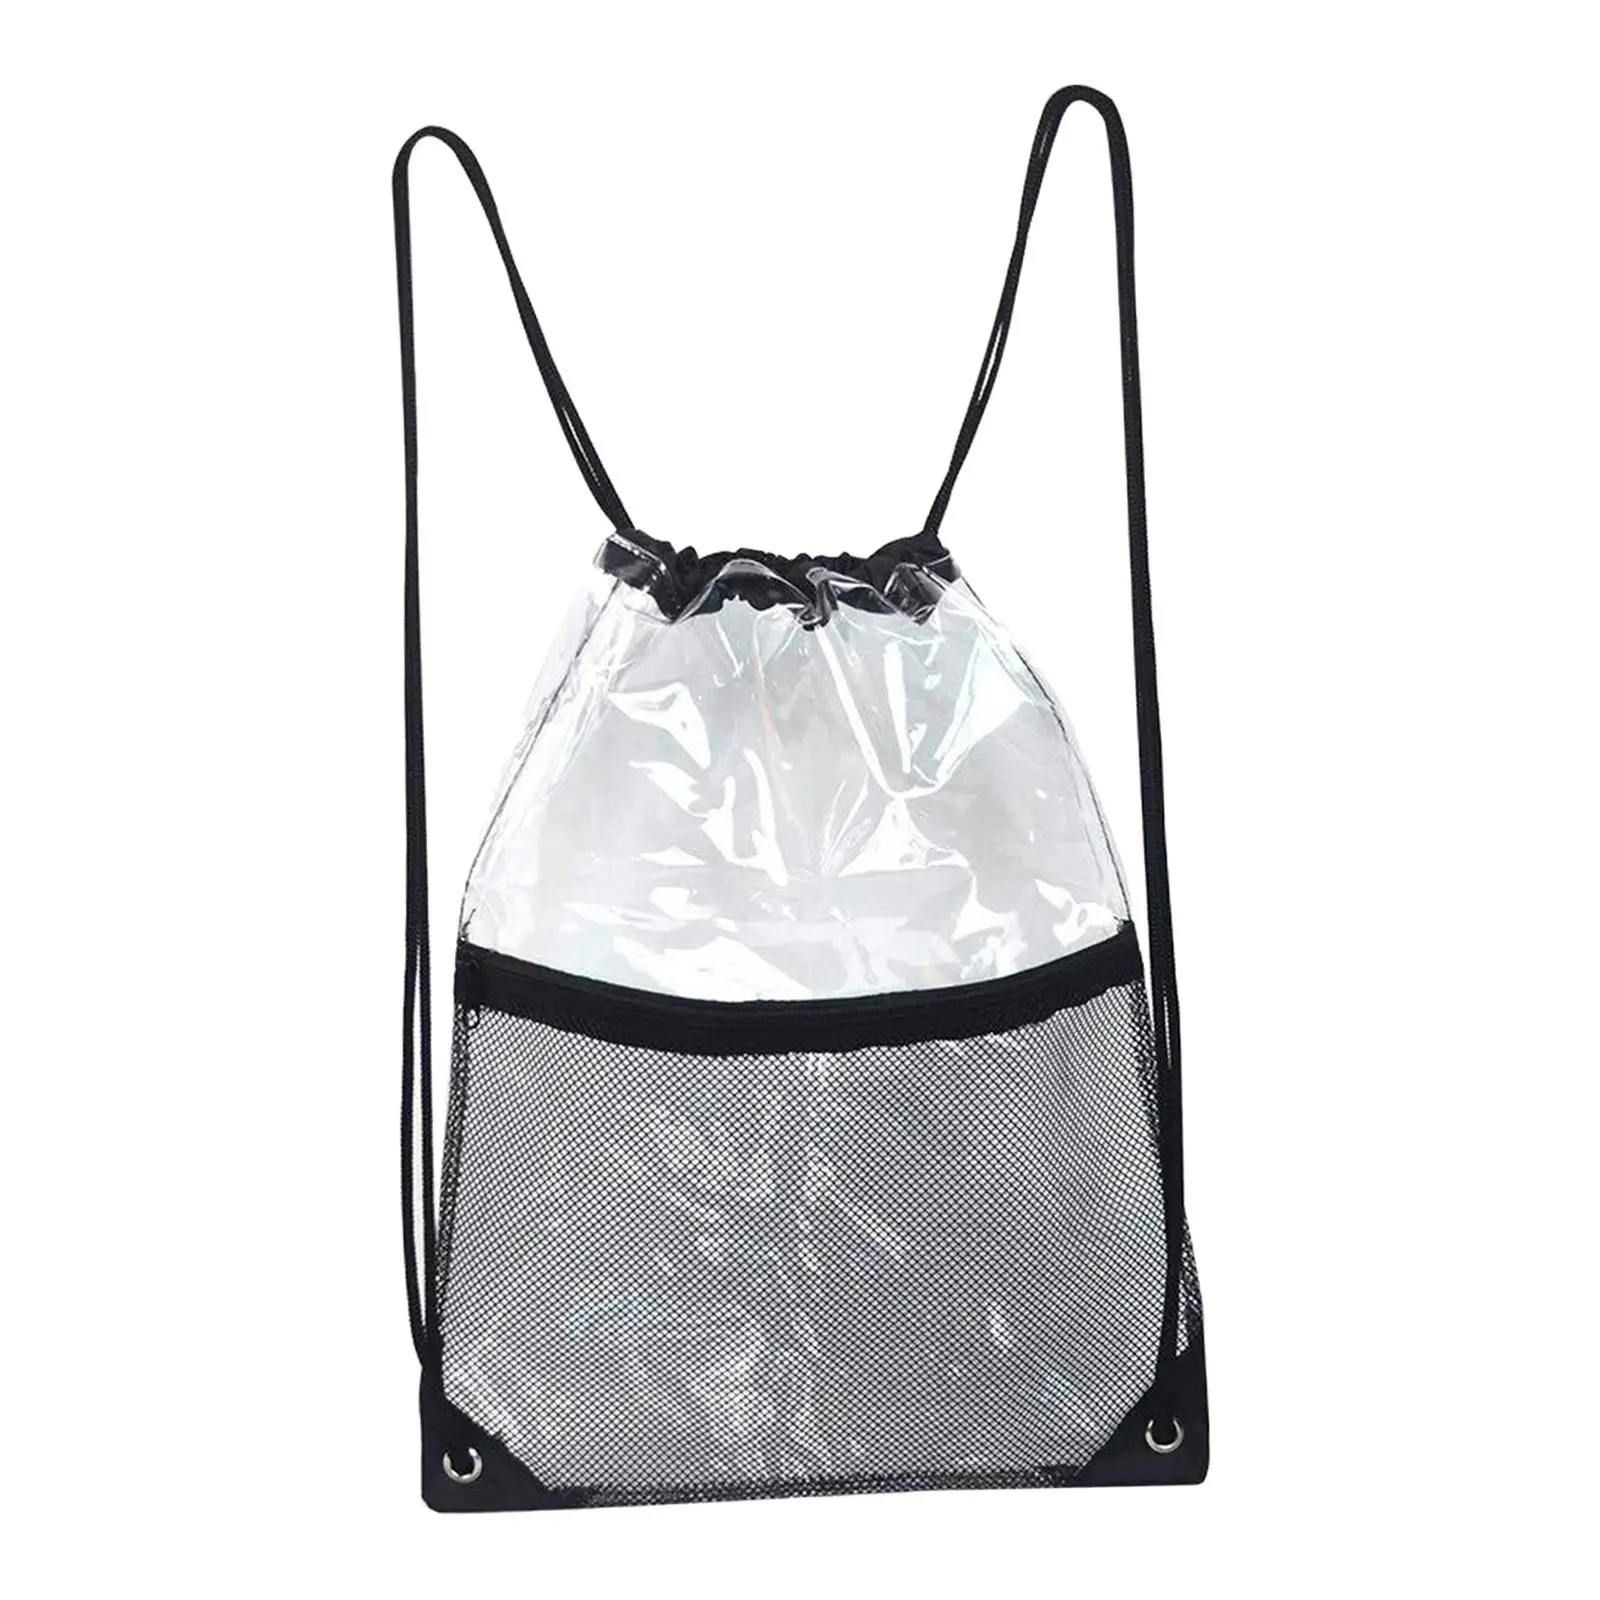 Clear Drawstring Backbag Small Clear Bag for Fitness Sporting Event